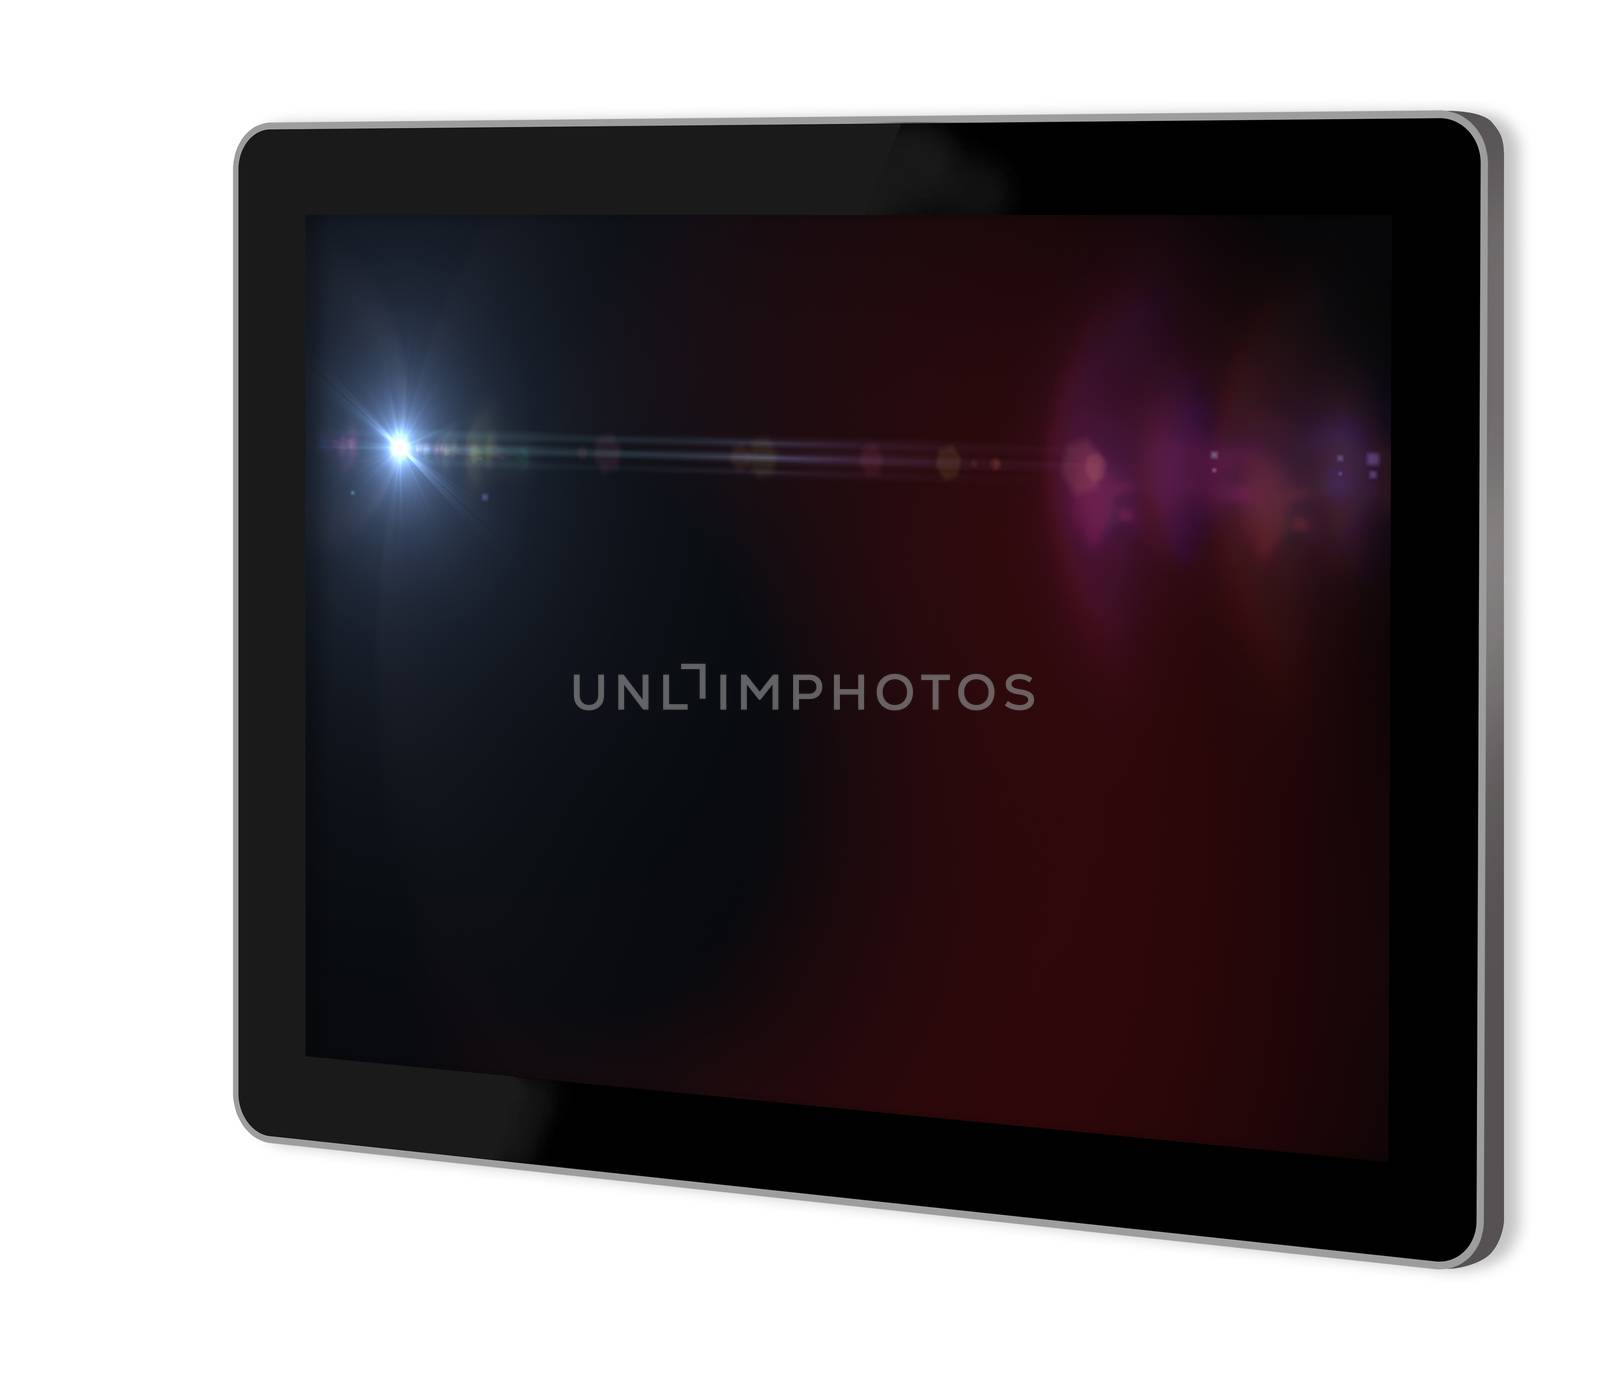 Lens flare effect in  space  on screen of tablet  made in 3d software